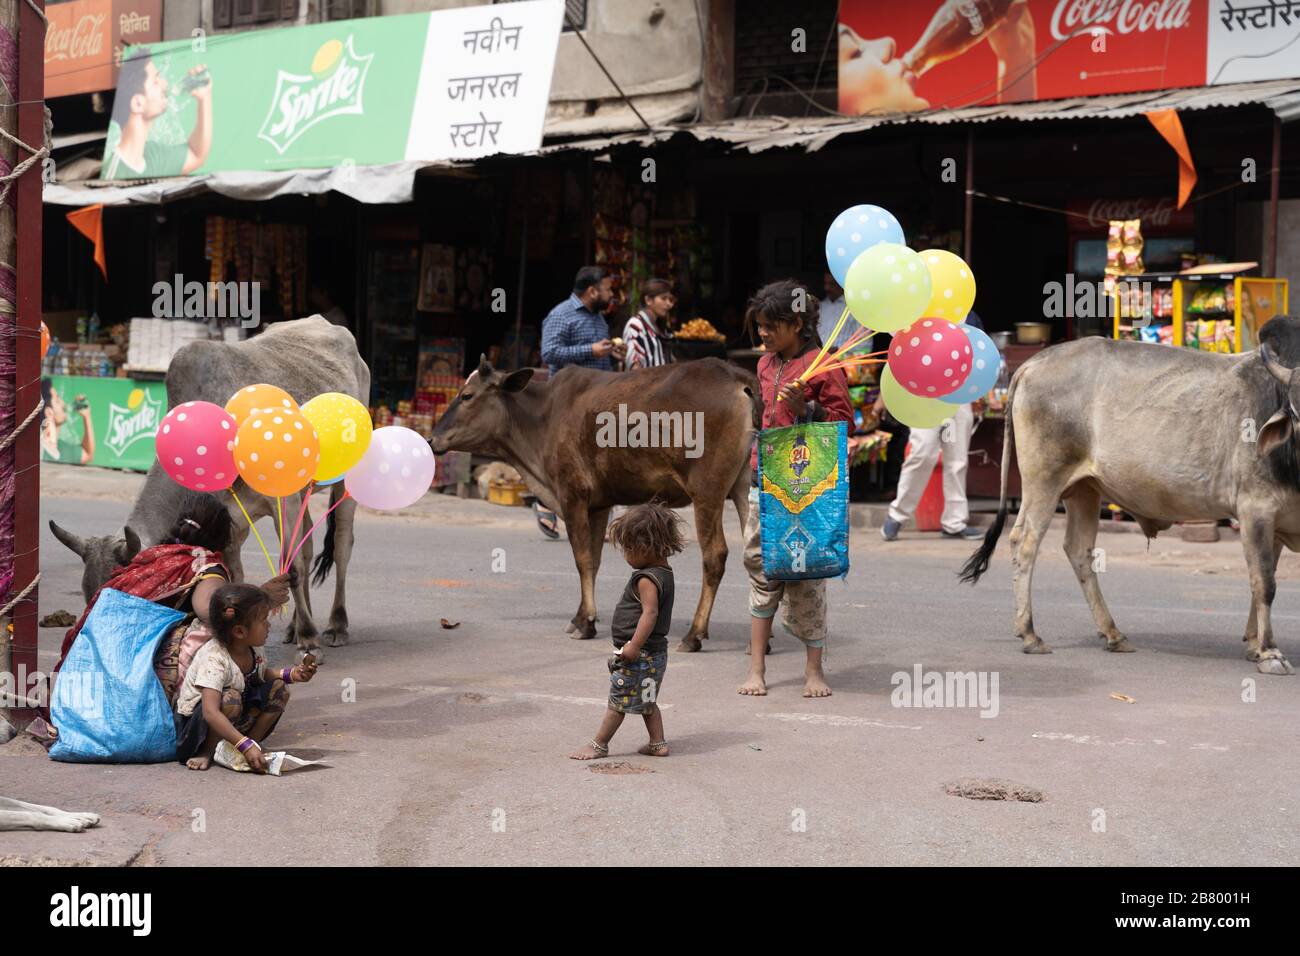 Eklingji, India - March 15, 2020: Street life scene in rural India, with children selling balloons, cows roaming around and market vendors Stock Photo